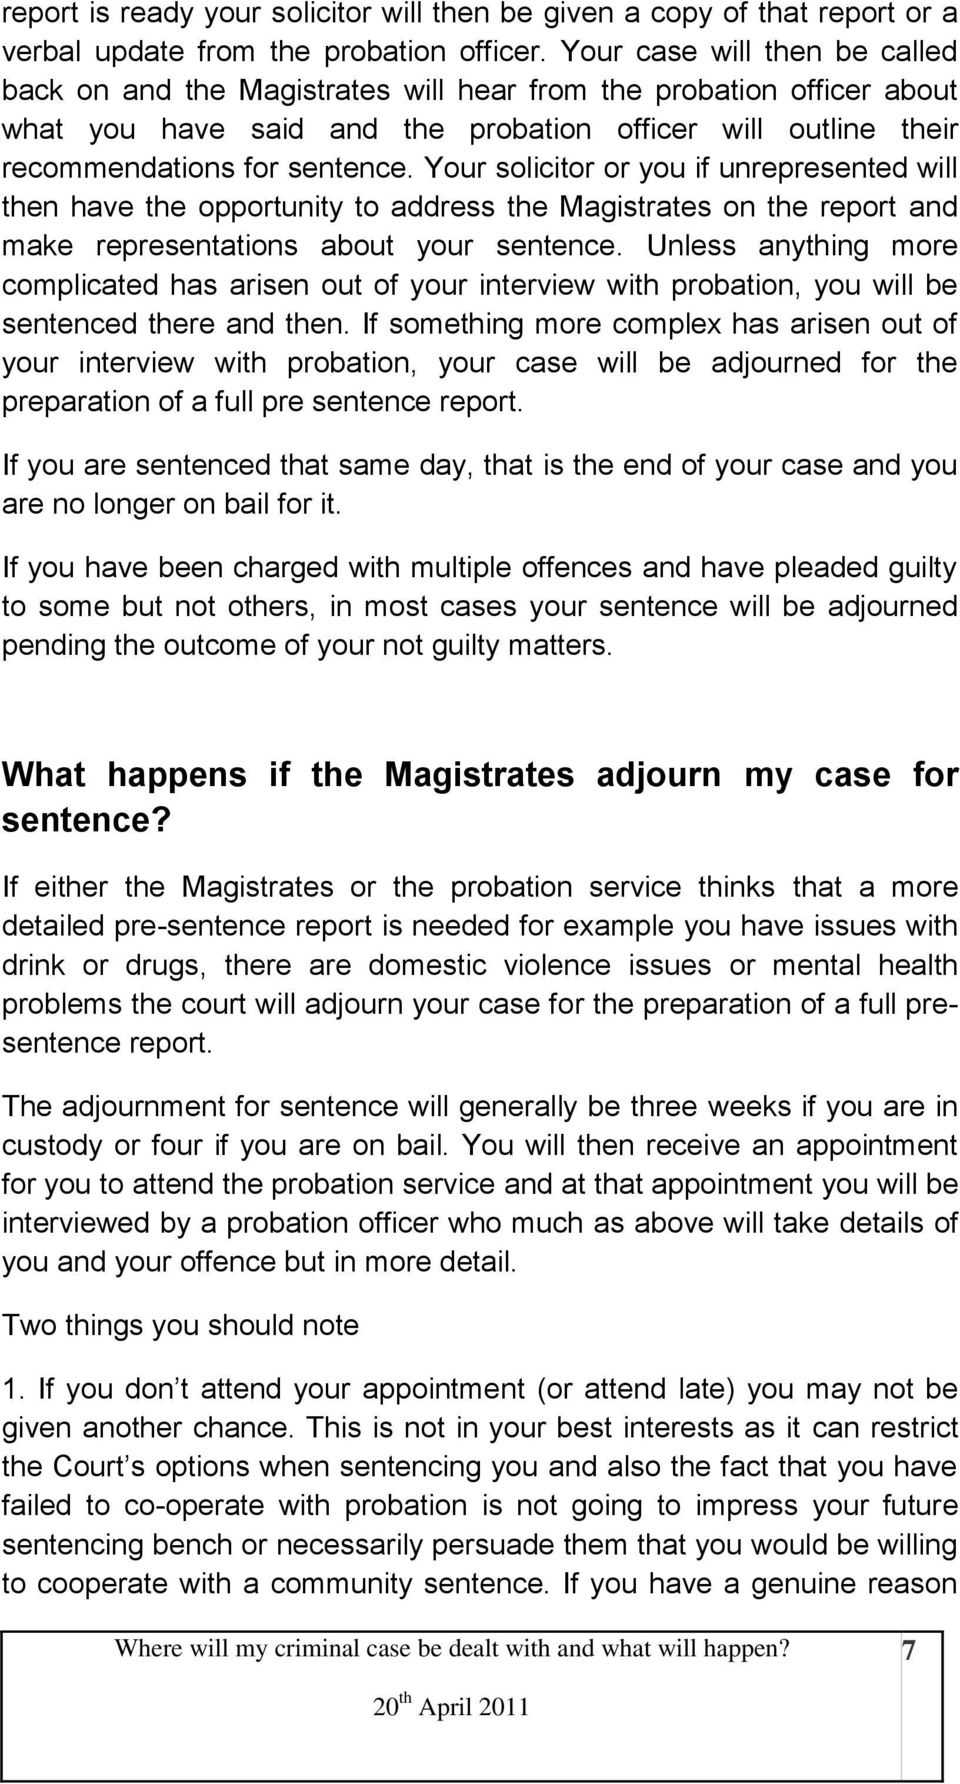 Your solicitor or you if unrepresented will then have the opportunity to address the Magistrates on the report and make representations about your sentence.